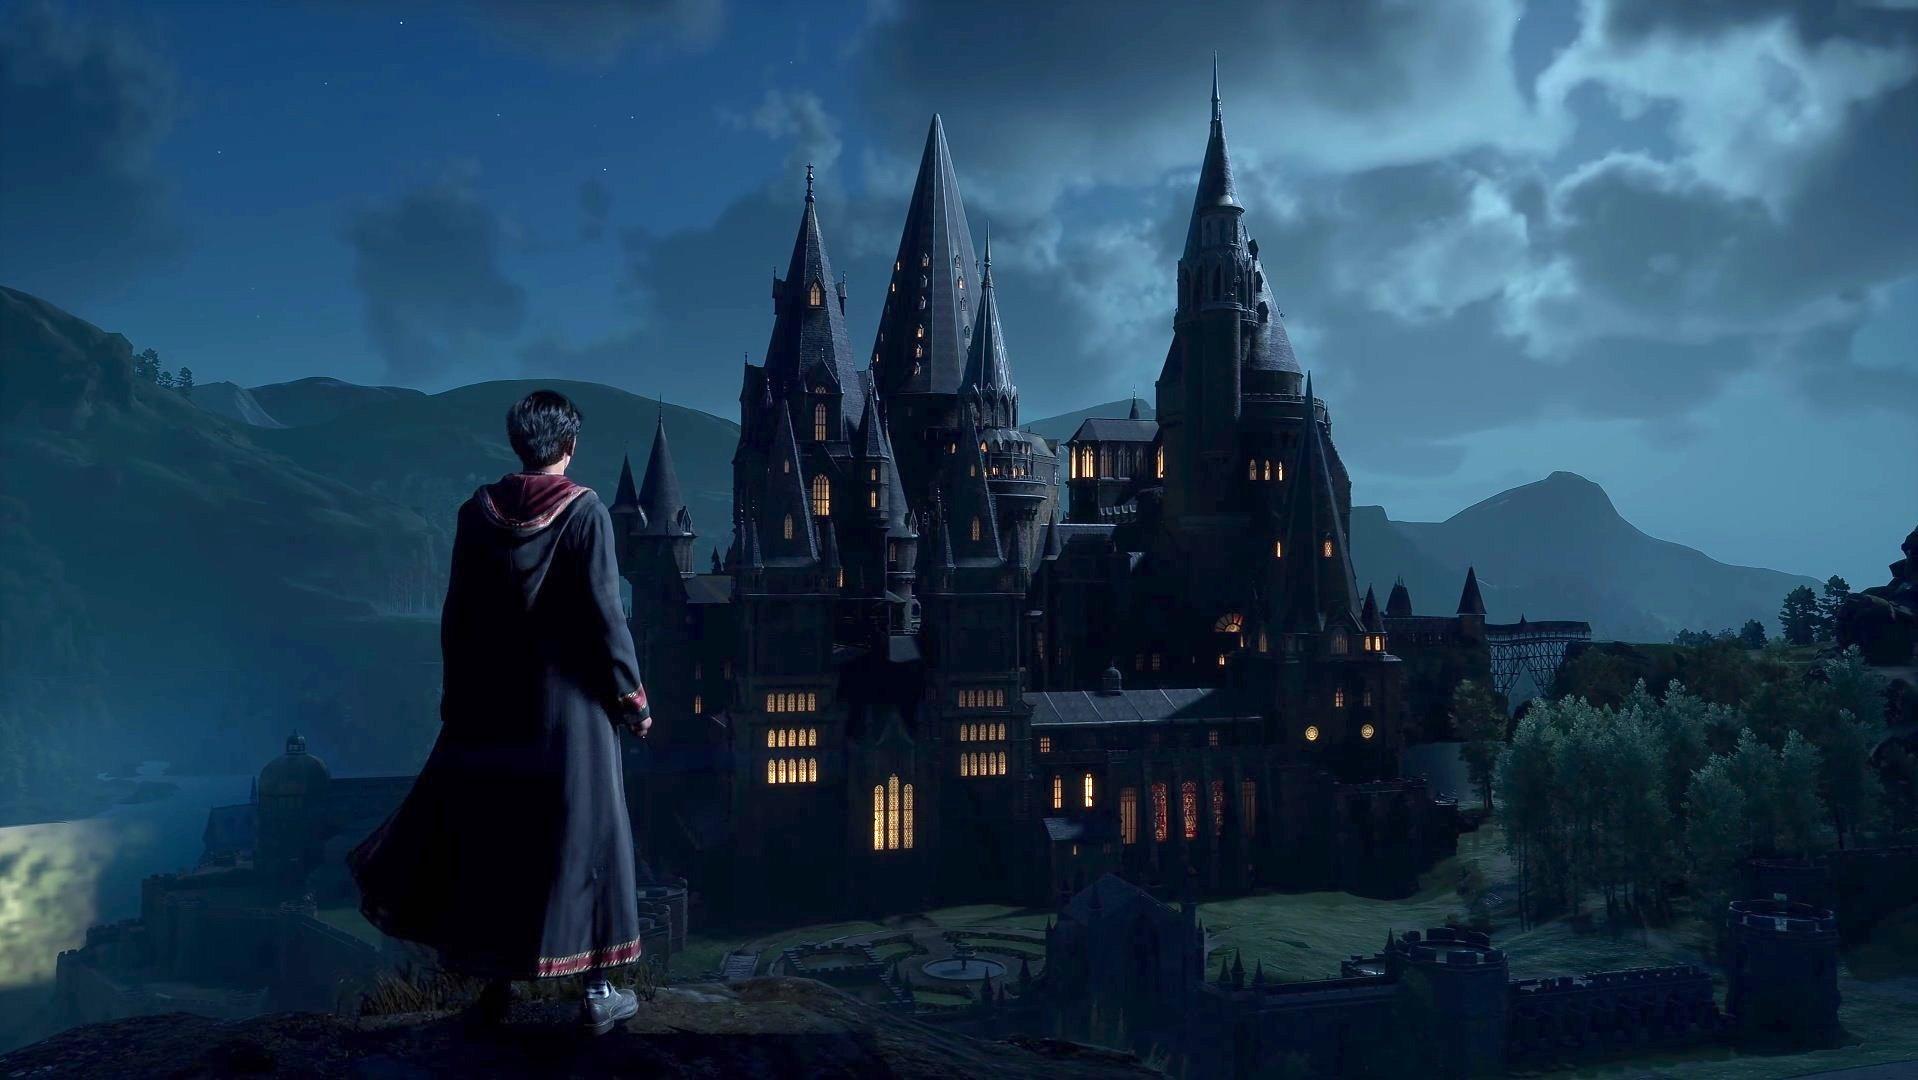 what consoles will hogwarts legacy be on